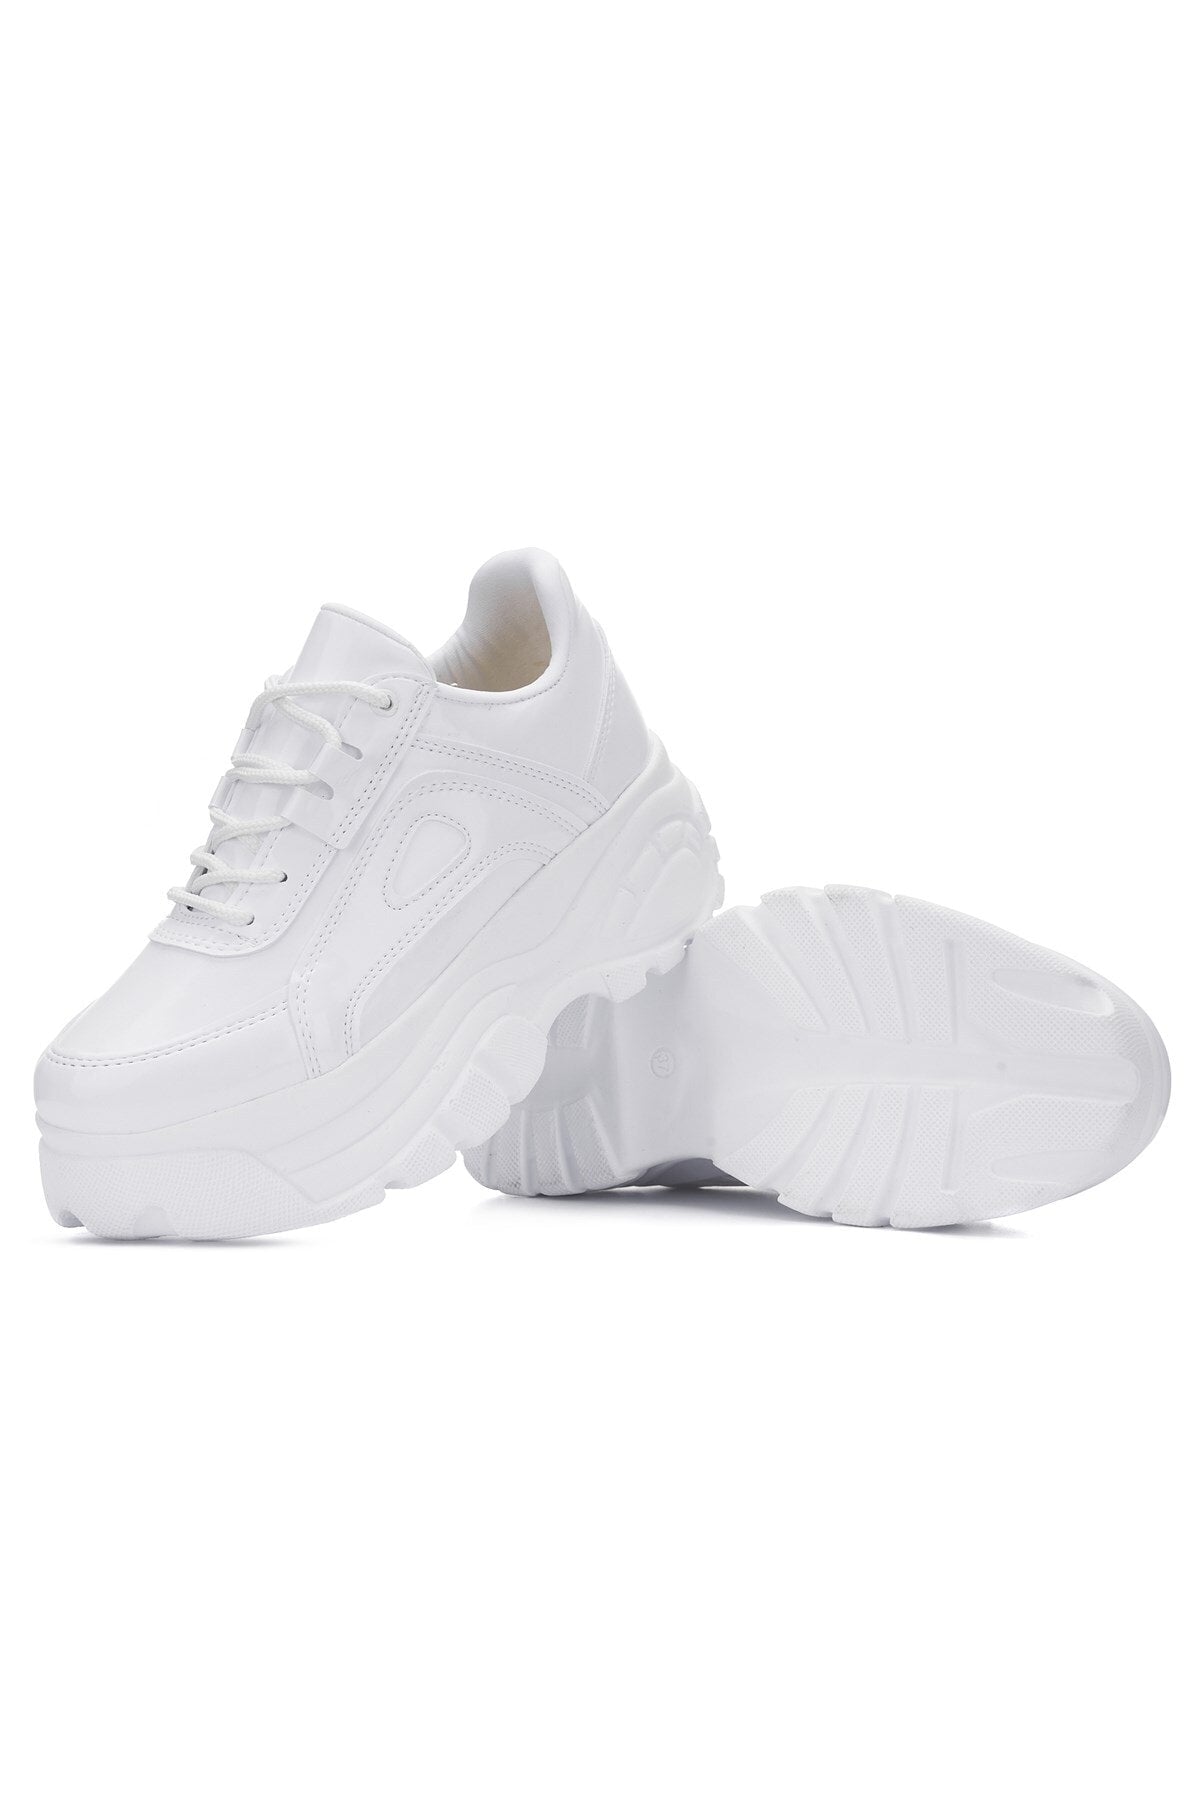 Casual Women's White Patent Leather Sneakers High Sole 6 Cm Comfortable Lightweight Sneaker 001